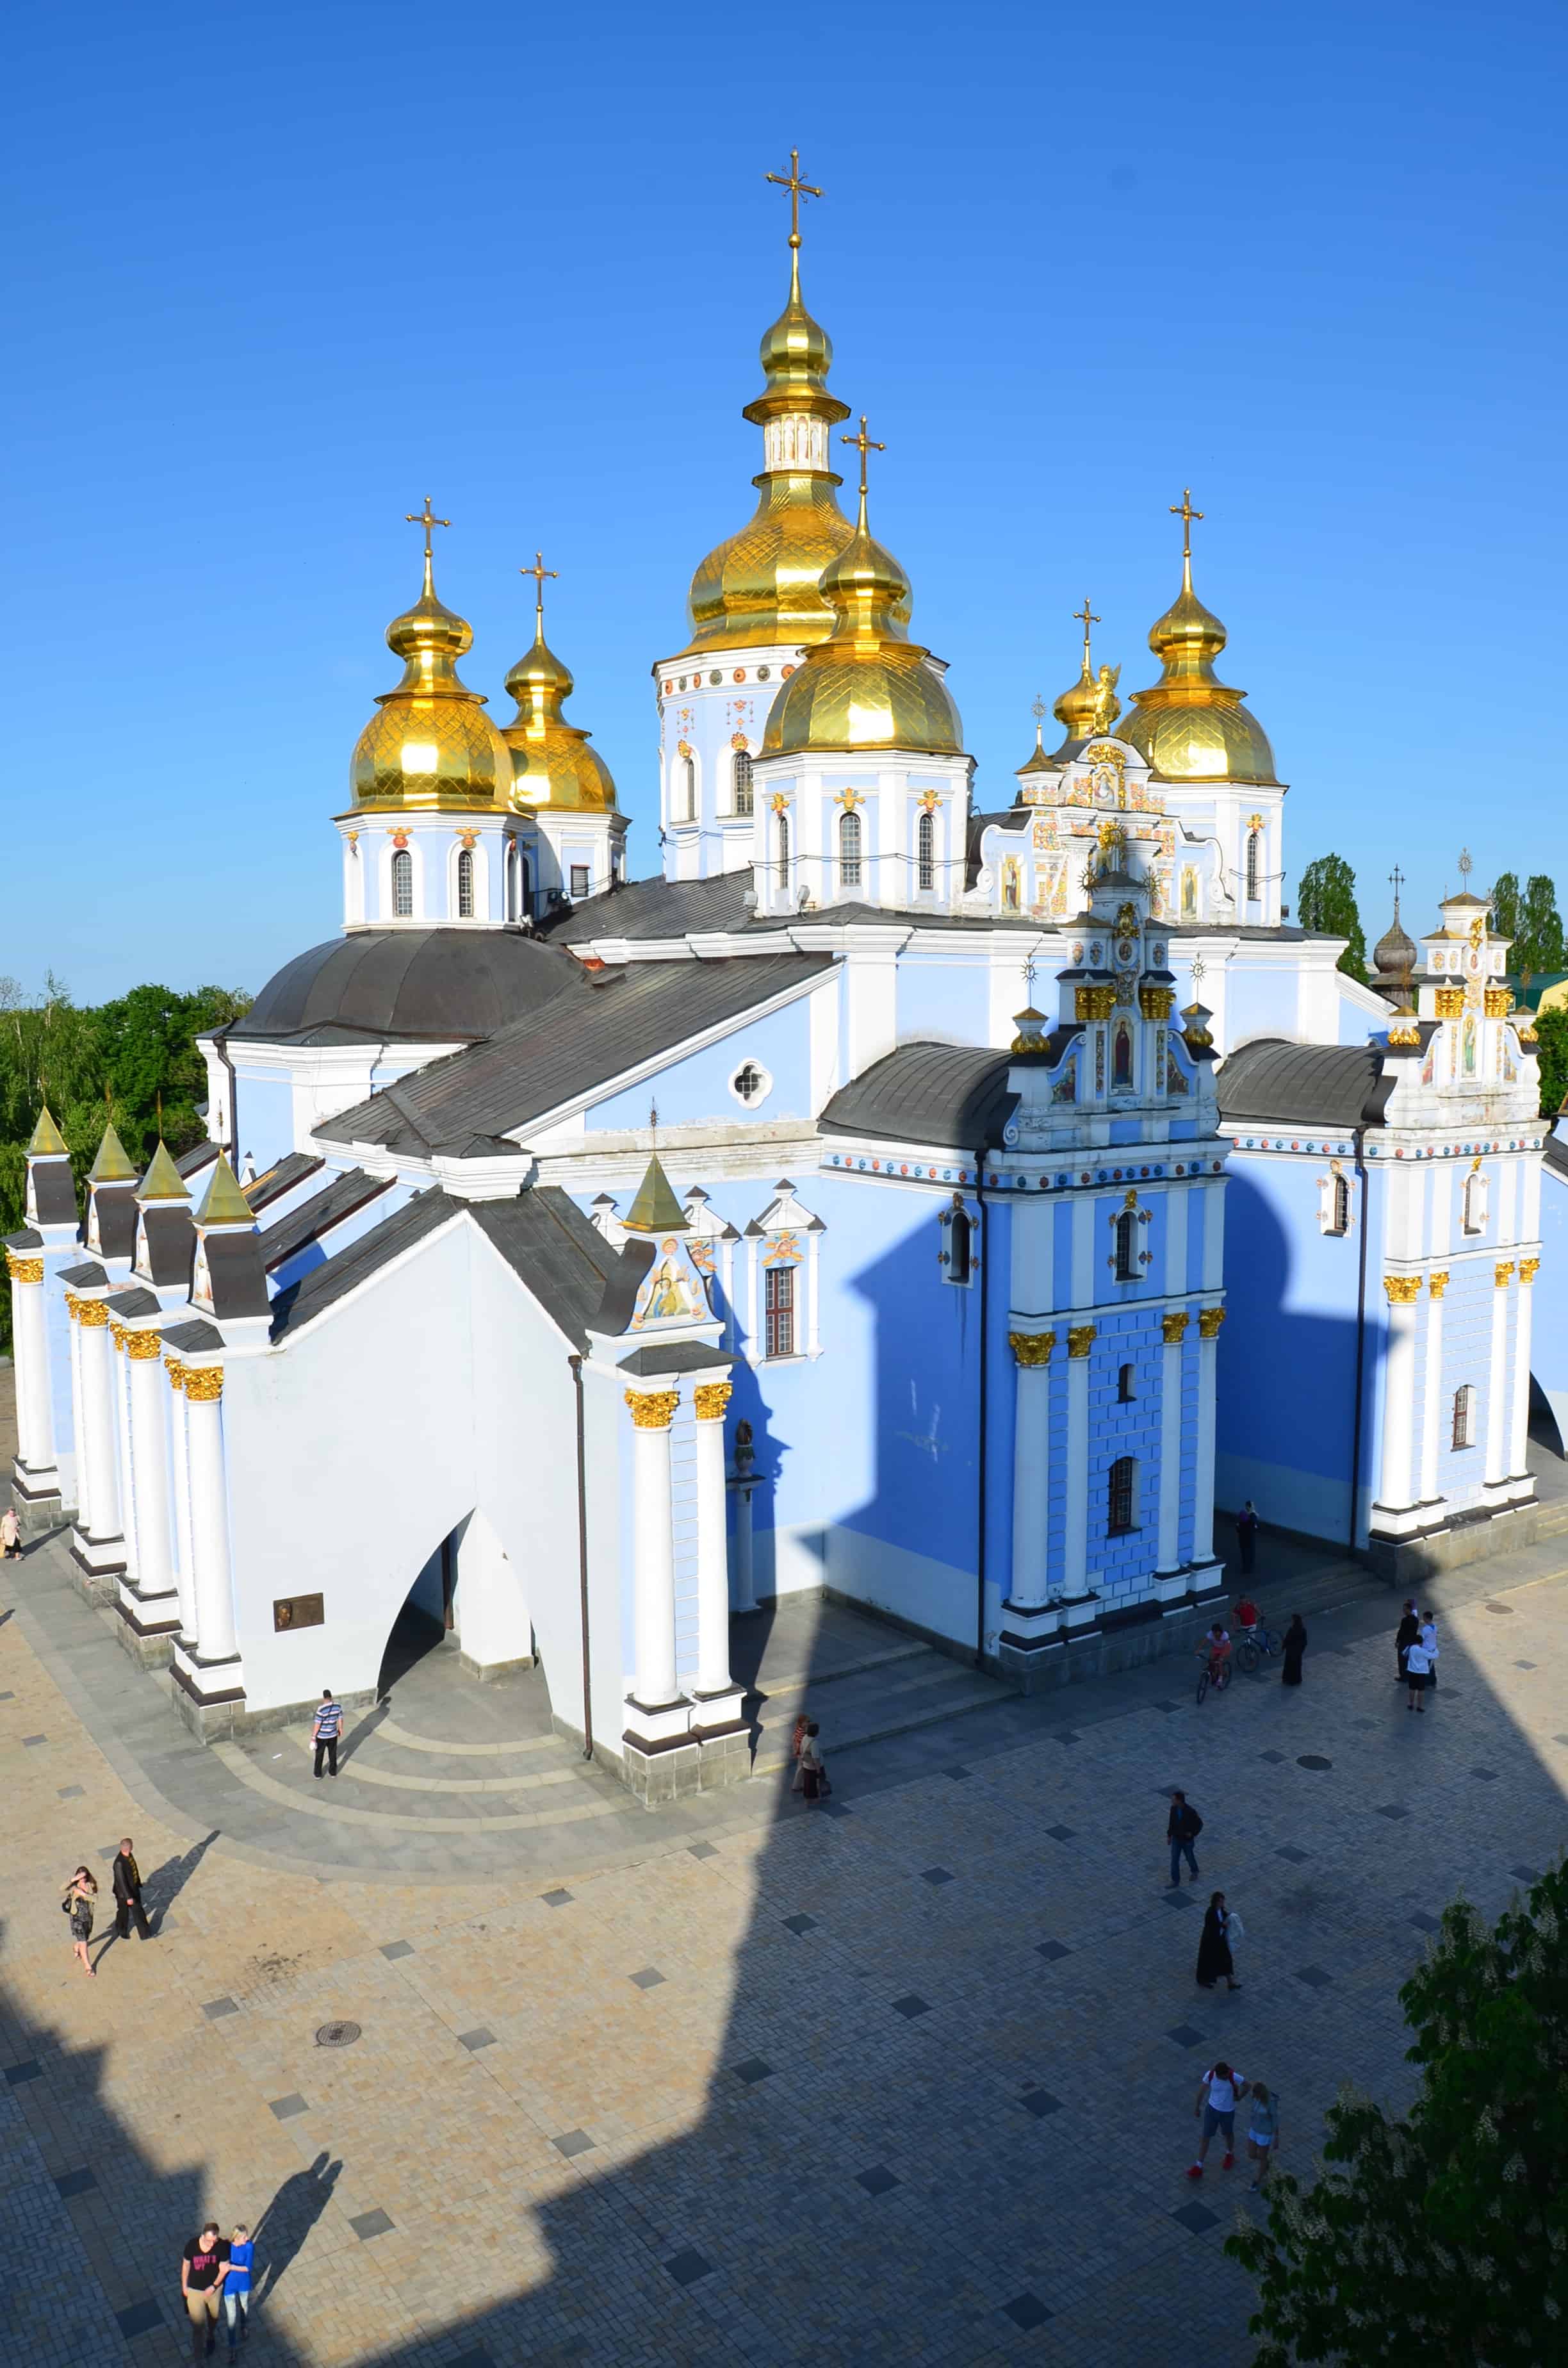 View of St. Michael's Golden-Domed Cathedral from the bell tower at St. Michael's Golden-Domed Monastery in Kyiv, Ukraine